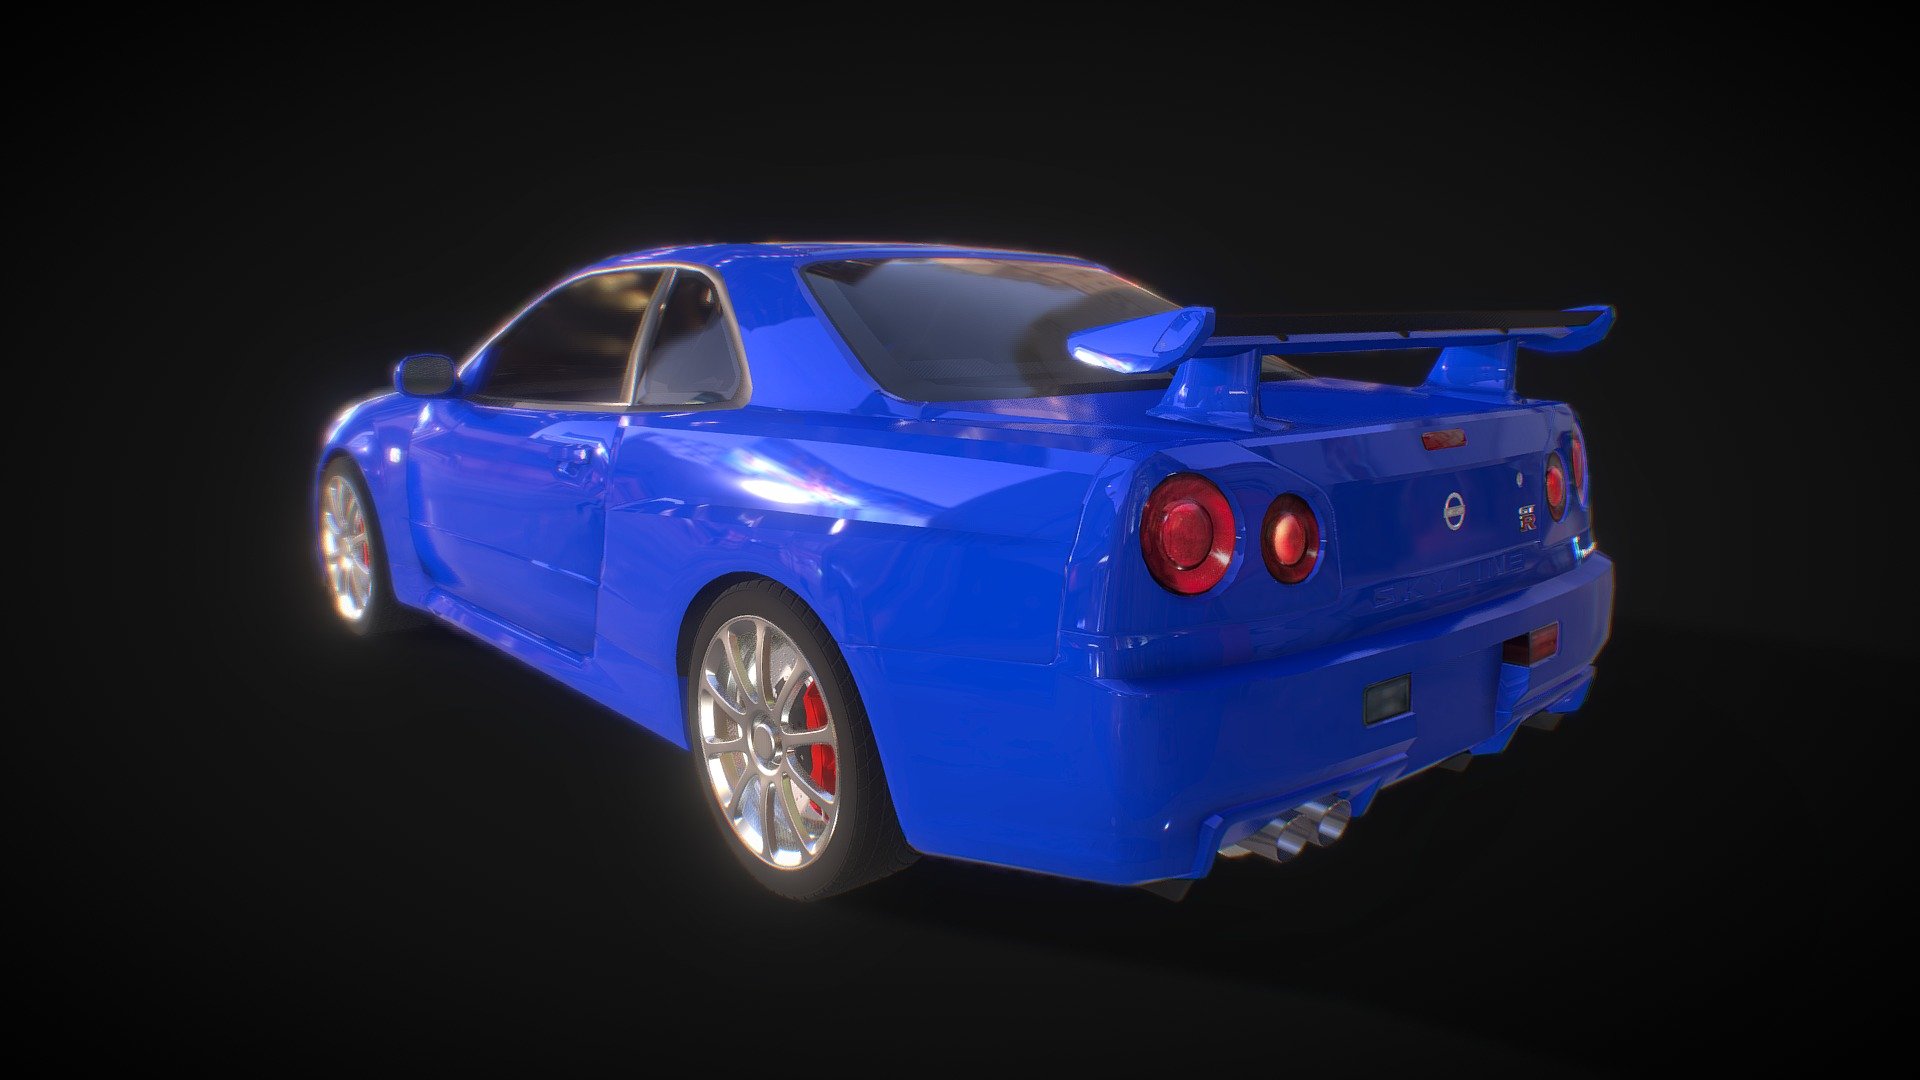 Nissan Skyline GTR R34 [Download]

low poly 3d model


          &gt; "The Nissan Skyline R34 GT, powered by the RB20DE NEO and coupled with a five-speed gearbox, became the most fuel-efficient straight-six Skyline to date (of any shape). The 4-speed automatic transmission available on some models was retained, and was upgraded with tiptronic-style manual controls.[70] An export-market 25GT Turbo coupe variant (often abbreviated as GT-T) was sold in Singapore and Hong Kong from 1998 to 2000, while the facelift 25GT Turbo was sold in New Zealand between 2001 and 2002 alongside the GT-R V-Spec. These were the only three countries outside of Japan that sold the R34 25GT Turbo model Skylines new. All Japanese Nissan Prince Store locations that sold the Skyline were renamed Nissan Red Stage." - Source: Wikipedia

 - Nissan Skyline GTR R34 [Download] - Buy Royalty Free 3D model by Hermes - 3D Assets (@BrunoHermes) 3d model